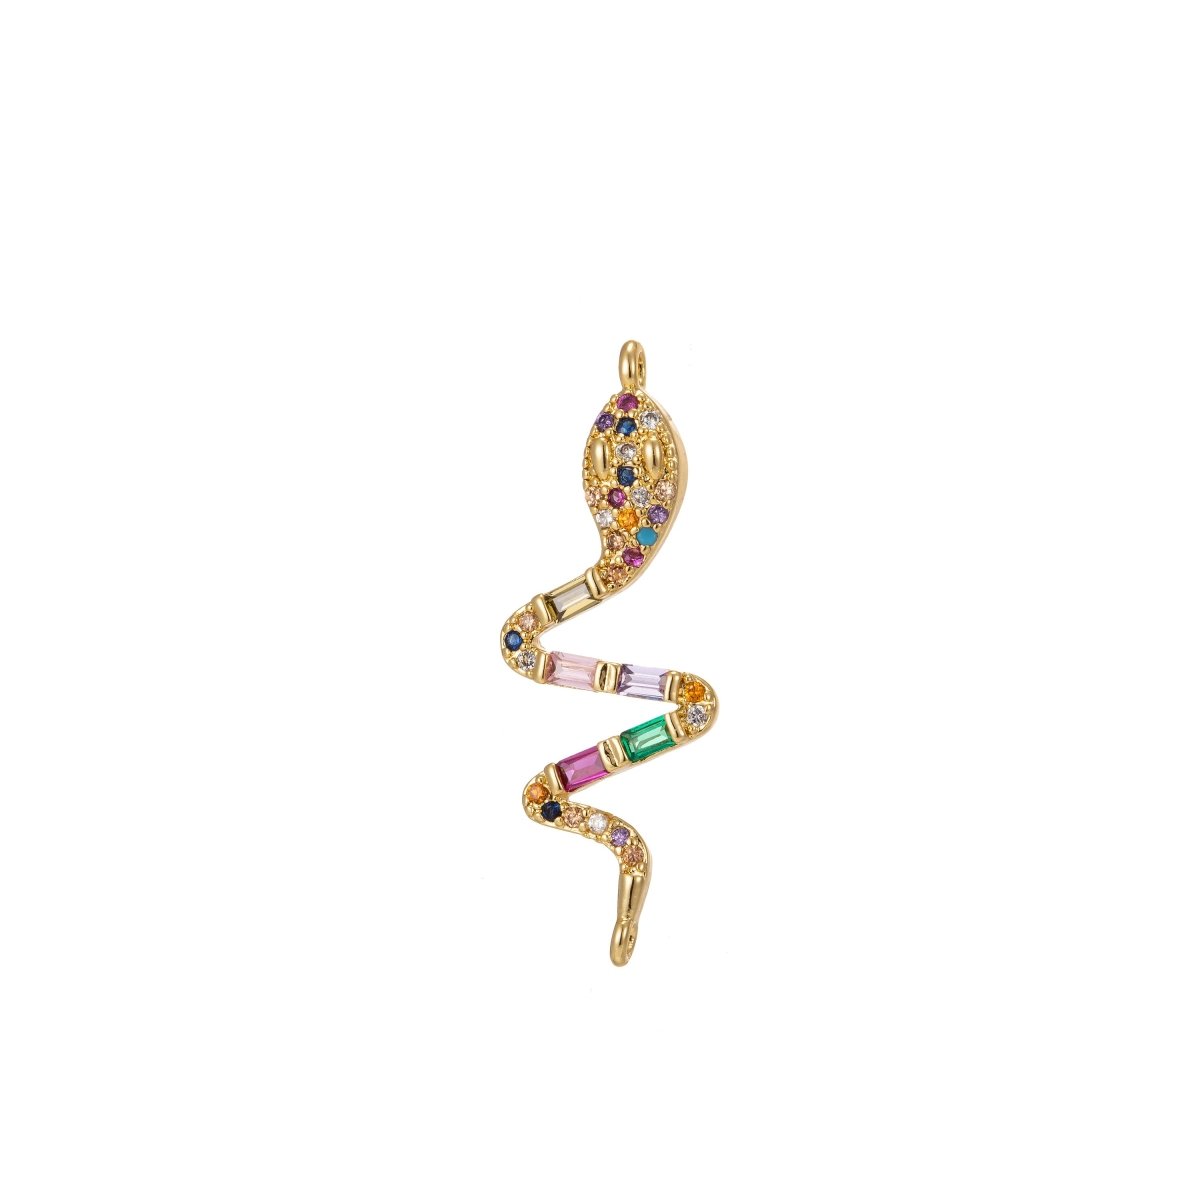 Dainty Colorful Micro Pave Snake Charm, Cubic Snake Charm Gold Filled Serpent Charm Animal Charm for Necklace, Earring, Bracelet Component F-313 - DLUXCA